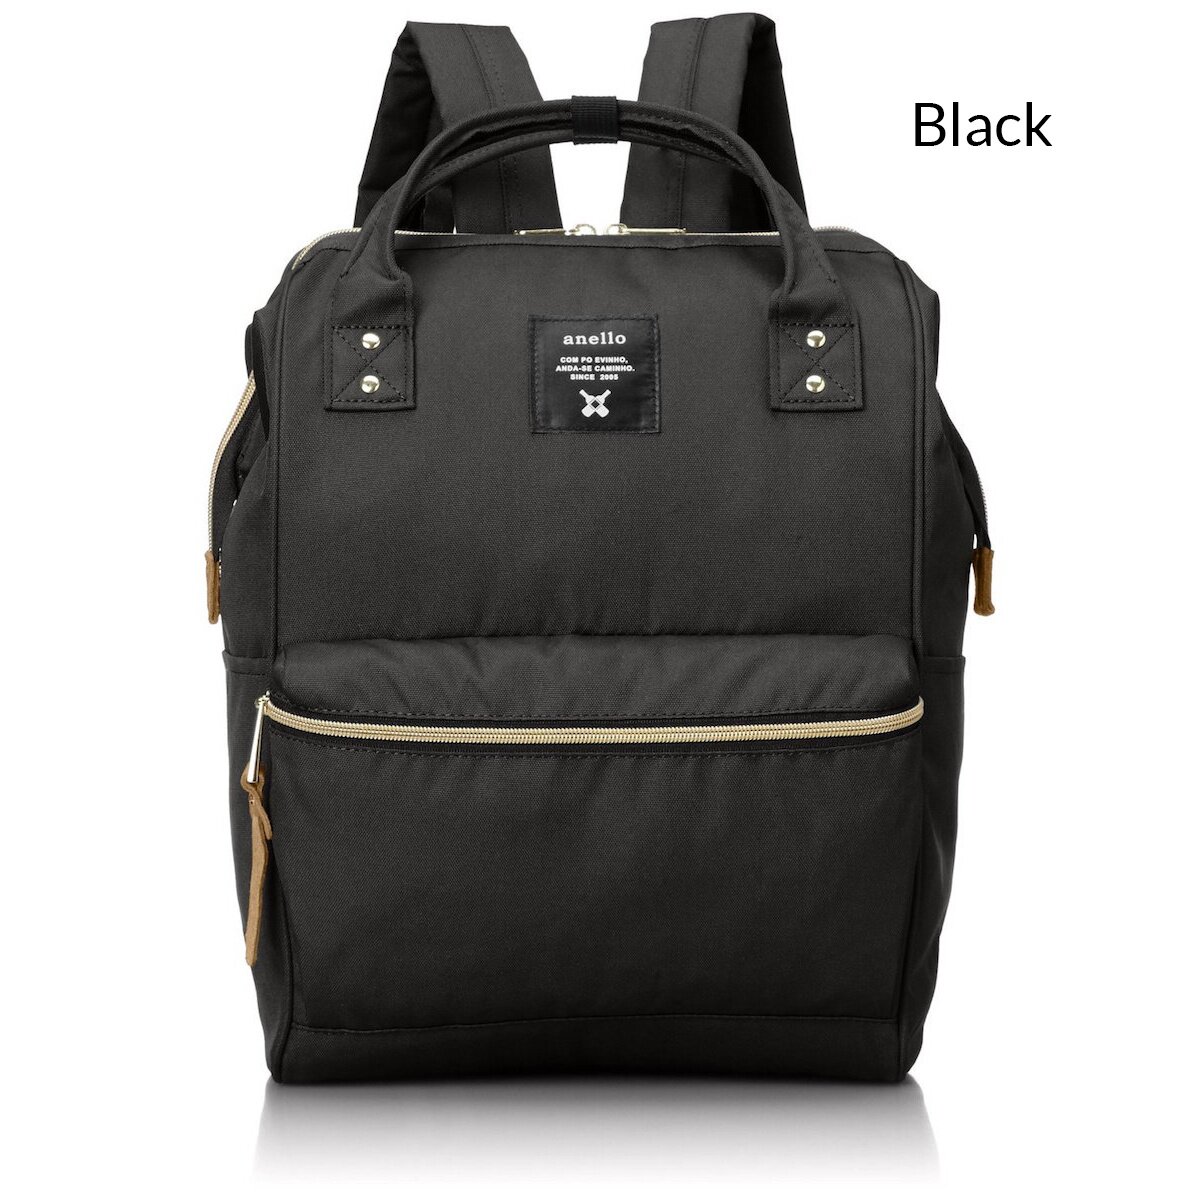 Top 5 Staff-Recommended Anello Backpacks: Tokyo's Latest Must-Have